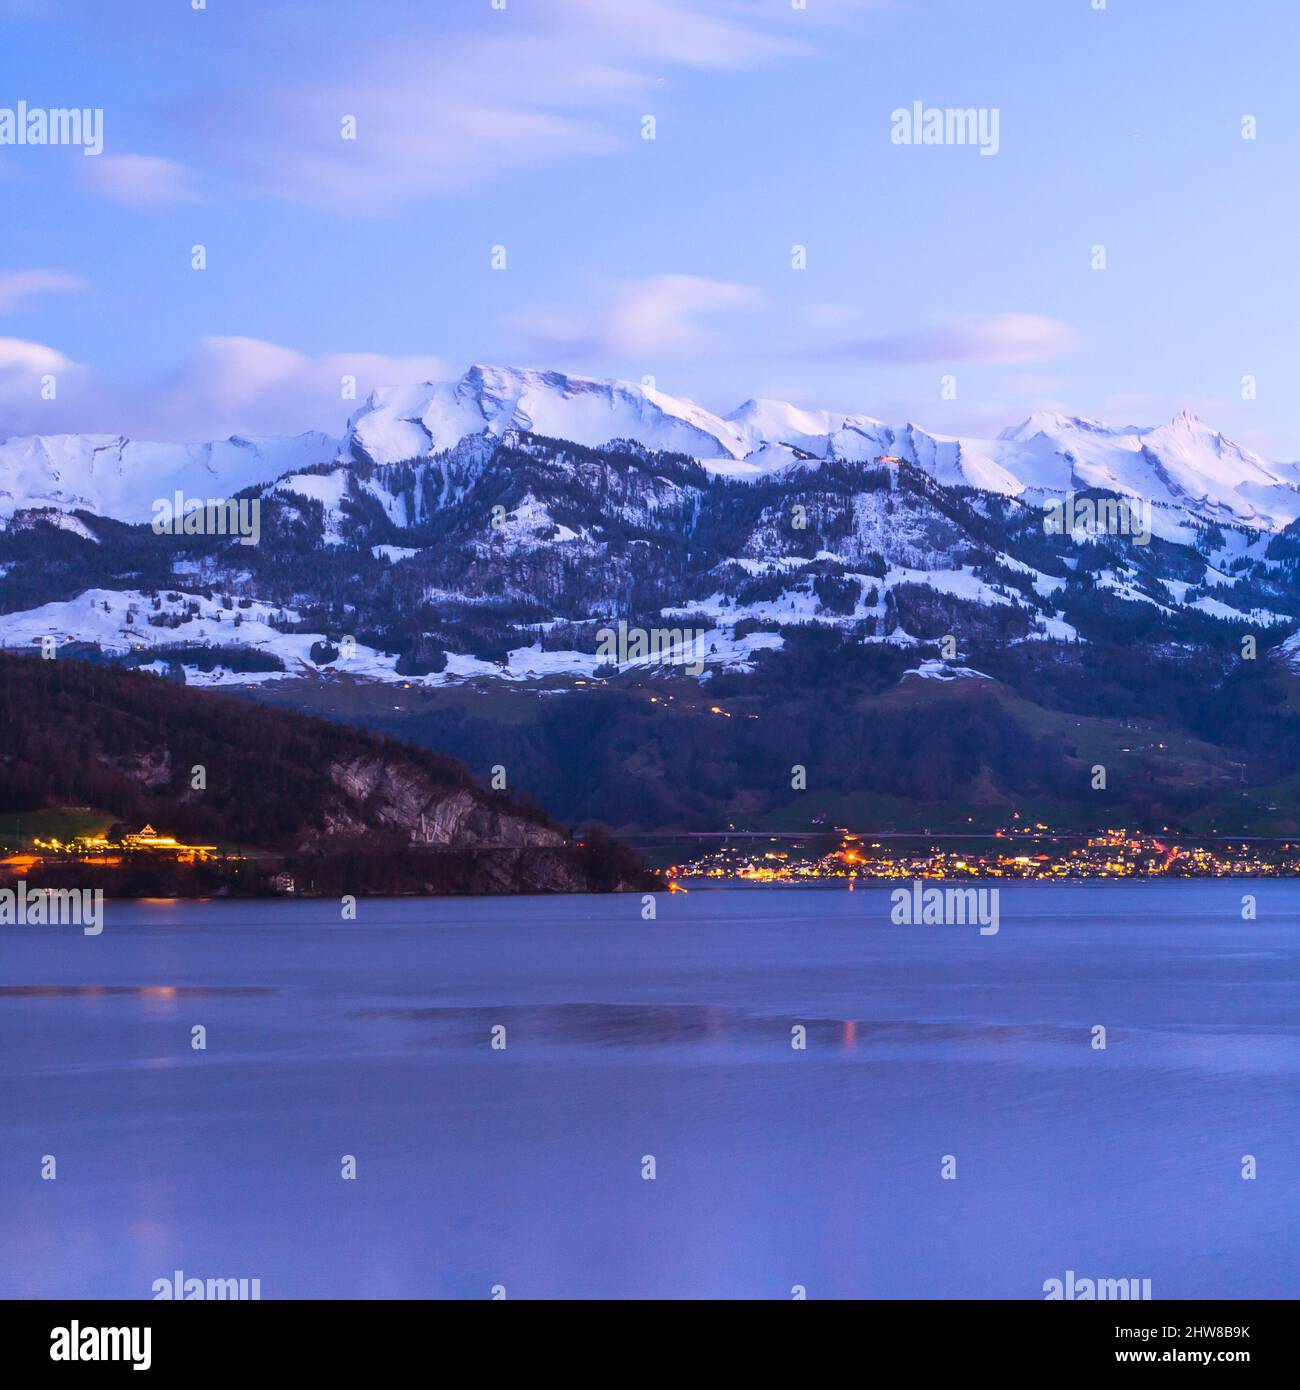 Switzerland, Alps peaks in the snow. Lake Lucerne. Evening lights of a small town Beckenried. Stock Photo